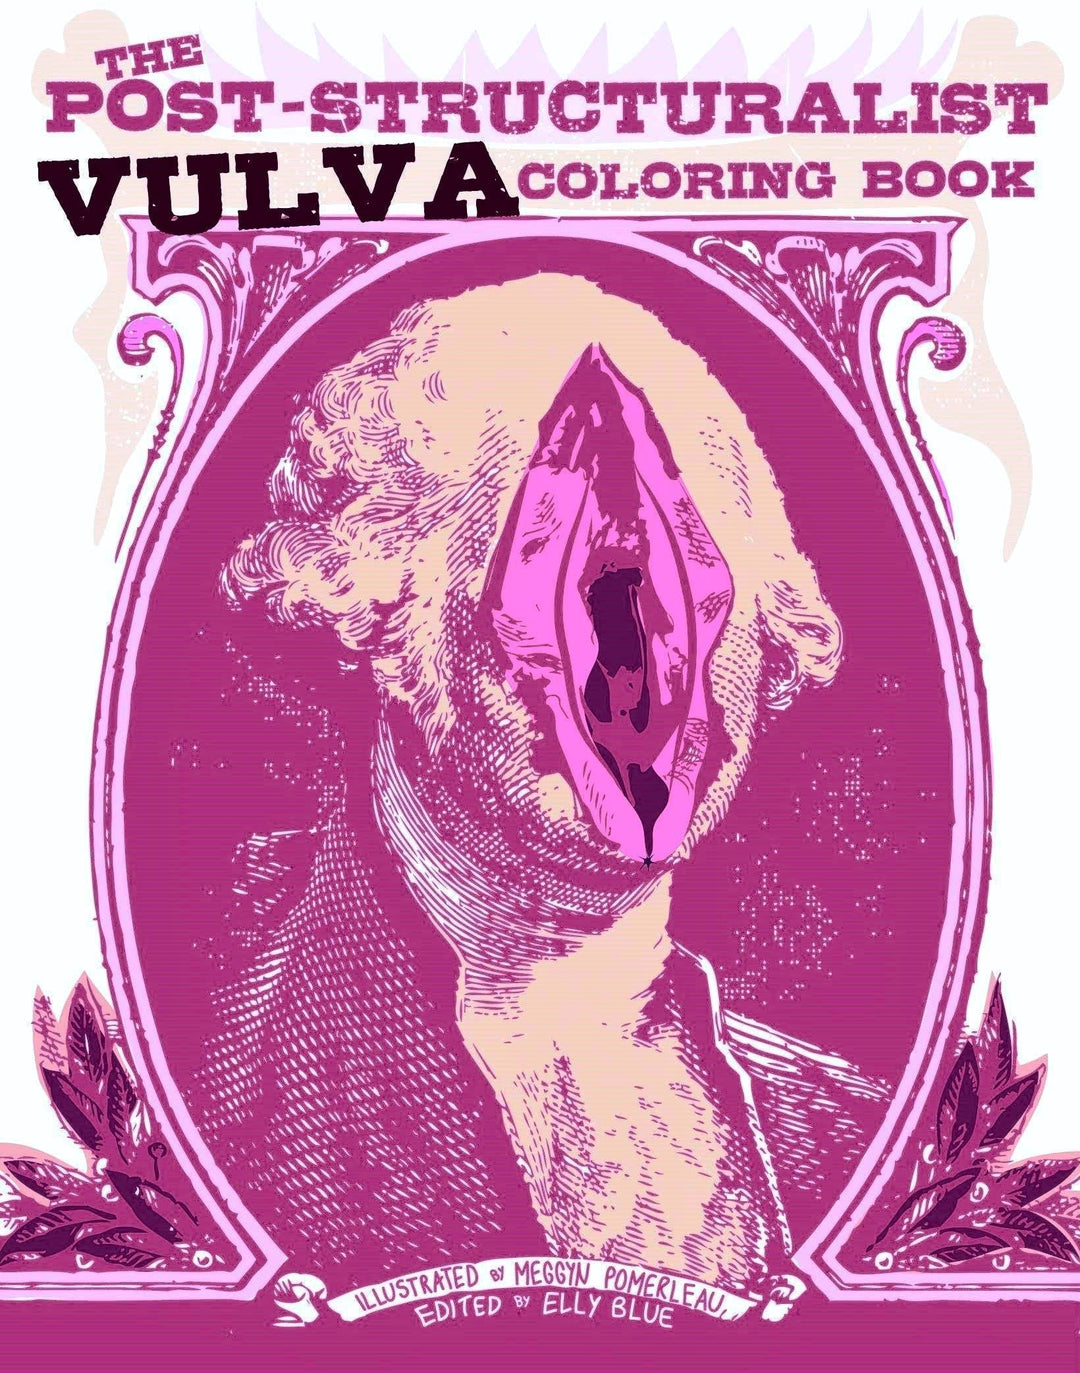 Post-Structuralist Vulva Coloring Book - Esme and Elodie